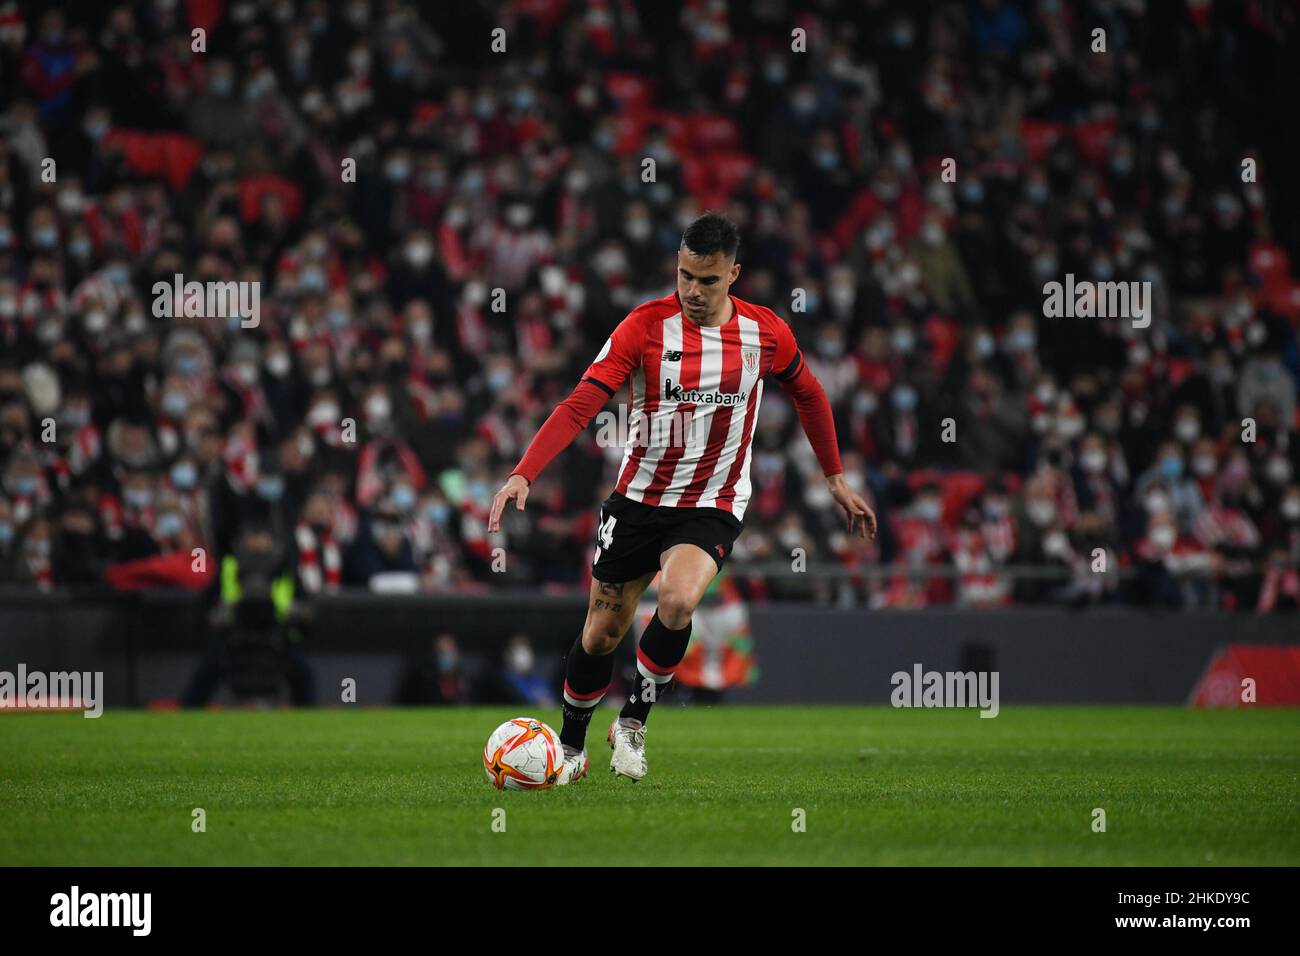 BILBAO, SPAIN - FEBRUARY 3: Dani Garcia of Athletic Bilbao passes the ball during the Copa del Rey quarterfinals match between Athletic Bilbao and Real Madri at San Mamés Stadium on February 3, 2022 in Bilbao, Spain. (Photo by Sara Aribó/PxImages) Stock Photo